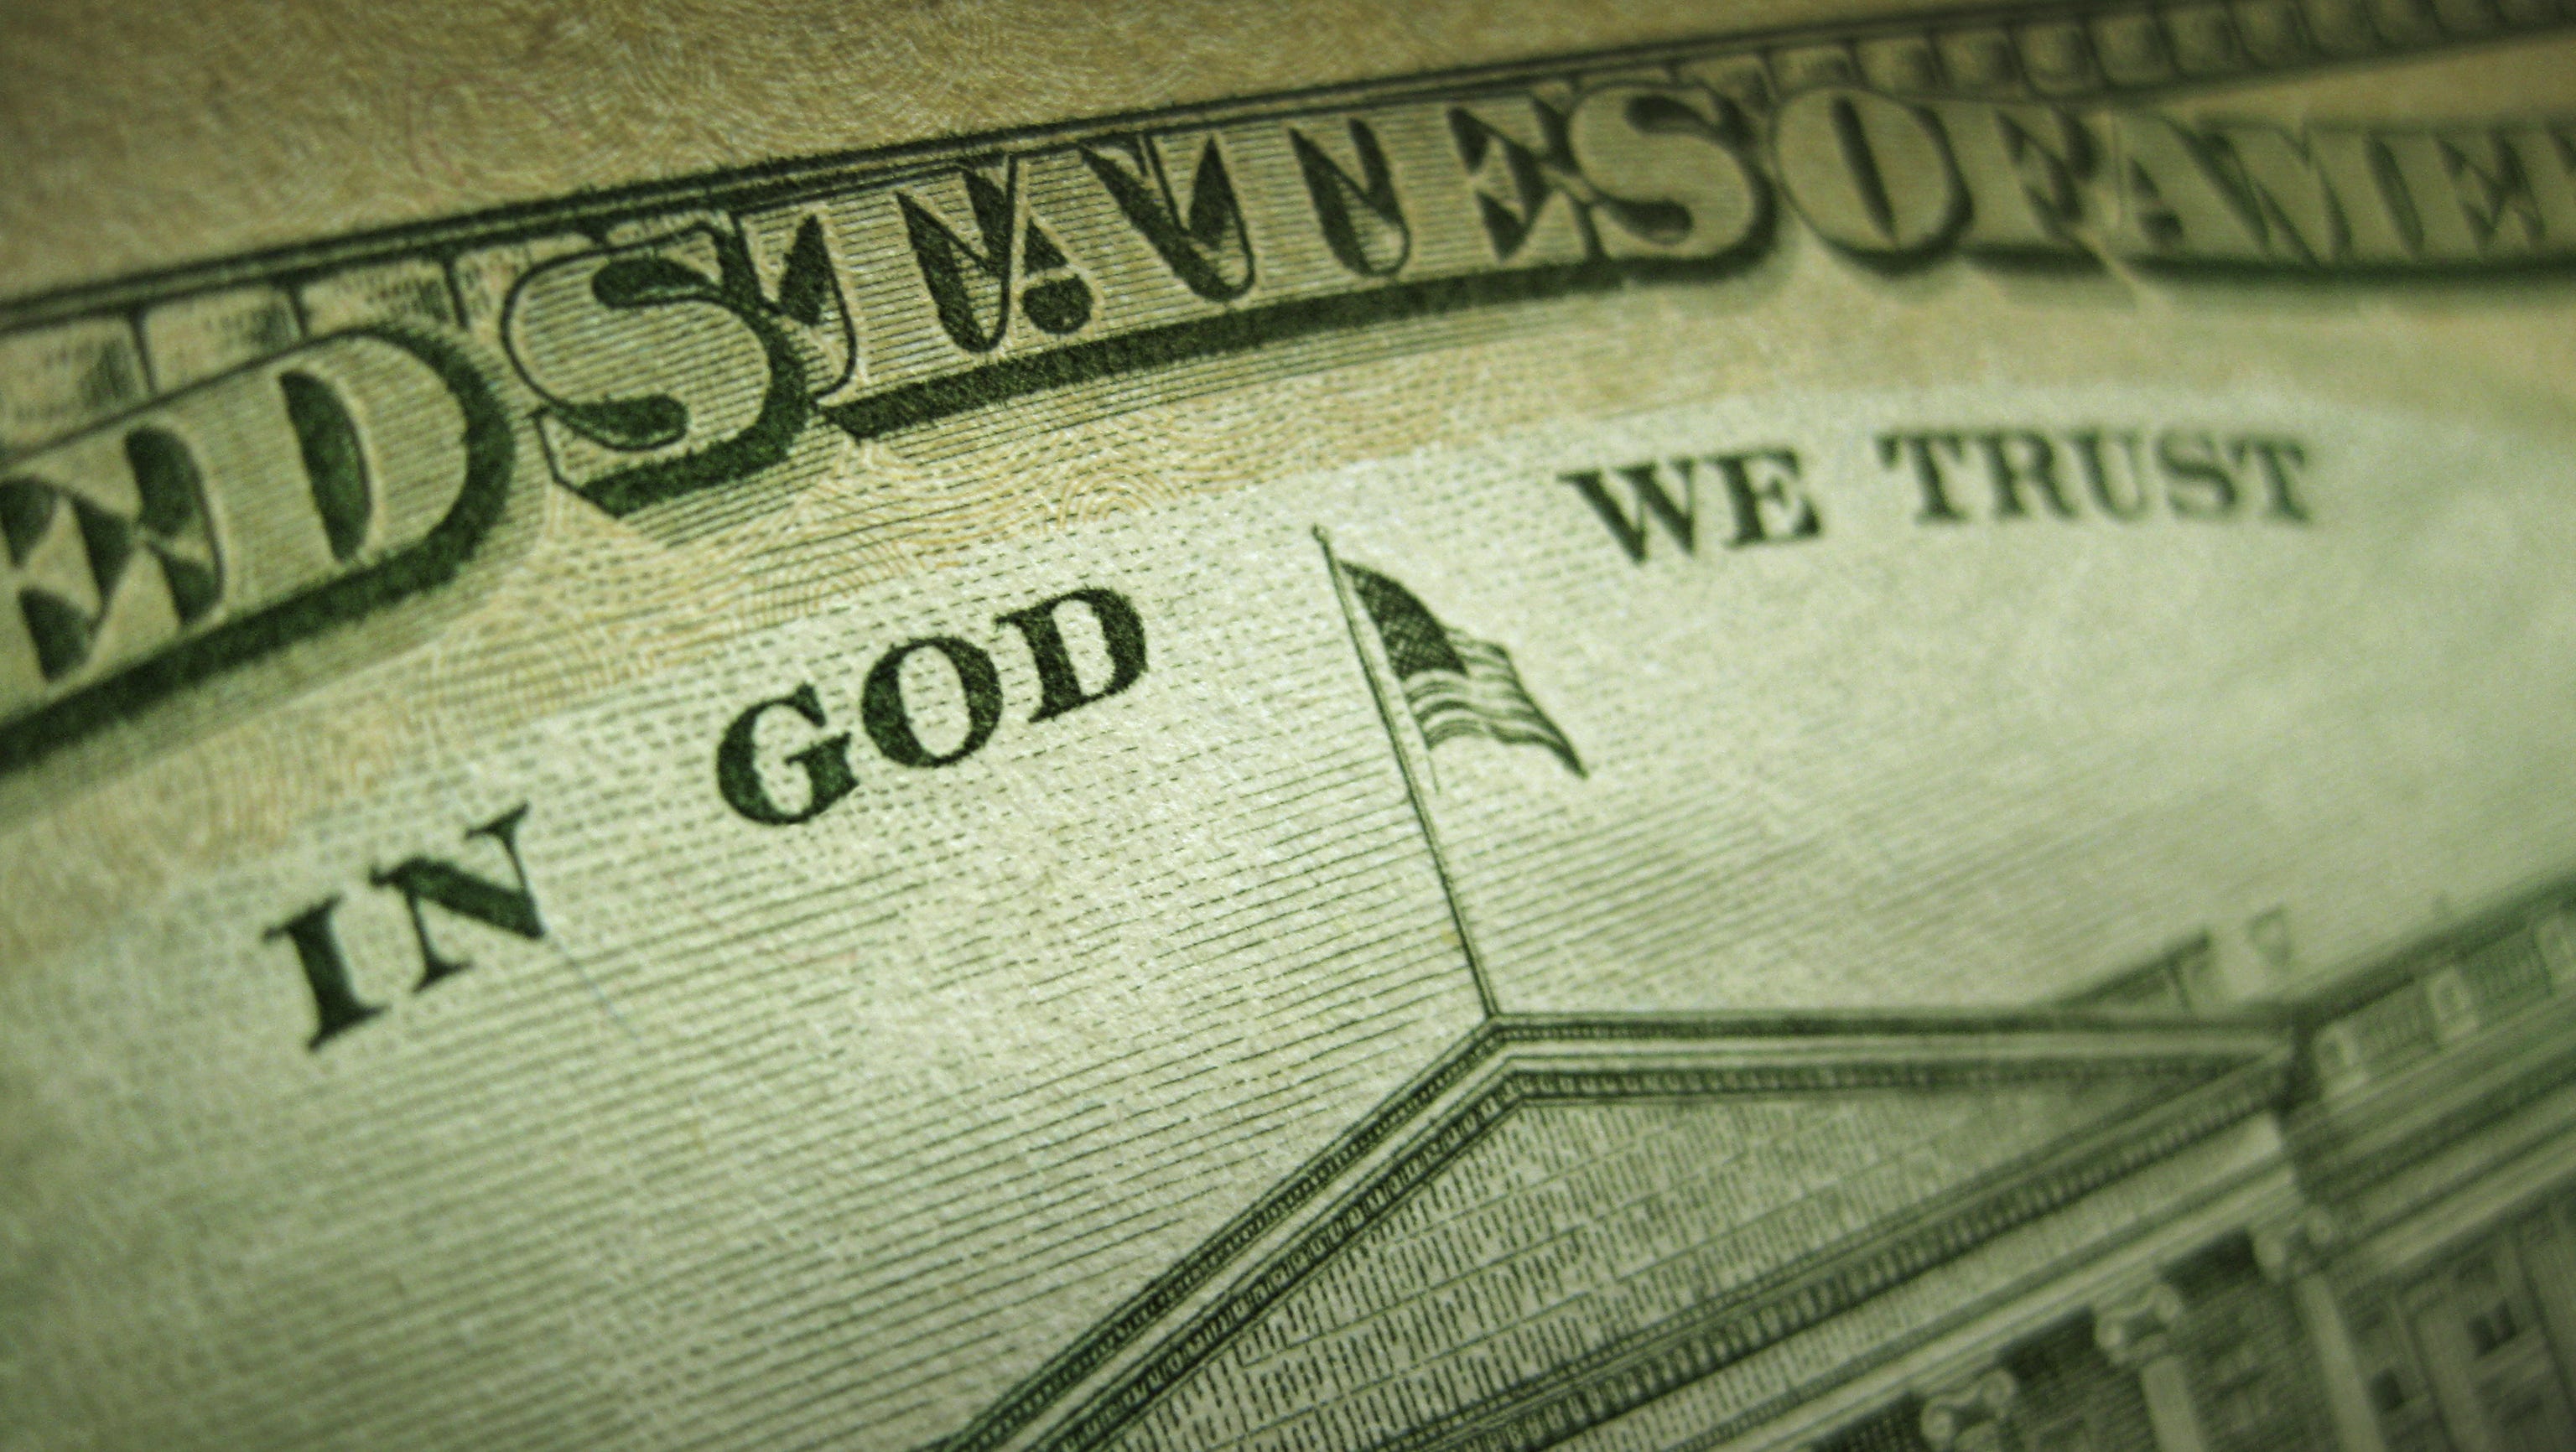 Dollars out on top on god. In God we Trust доллар купюра. In God we Trust на долларе. Купюра США “in God we Trust”. Надпись на долларе in God we Trust.